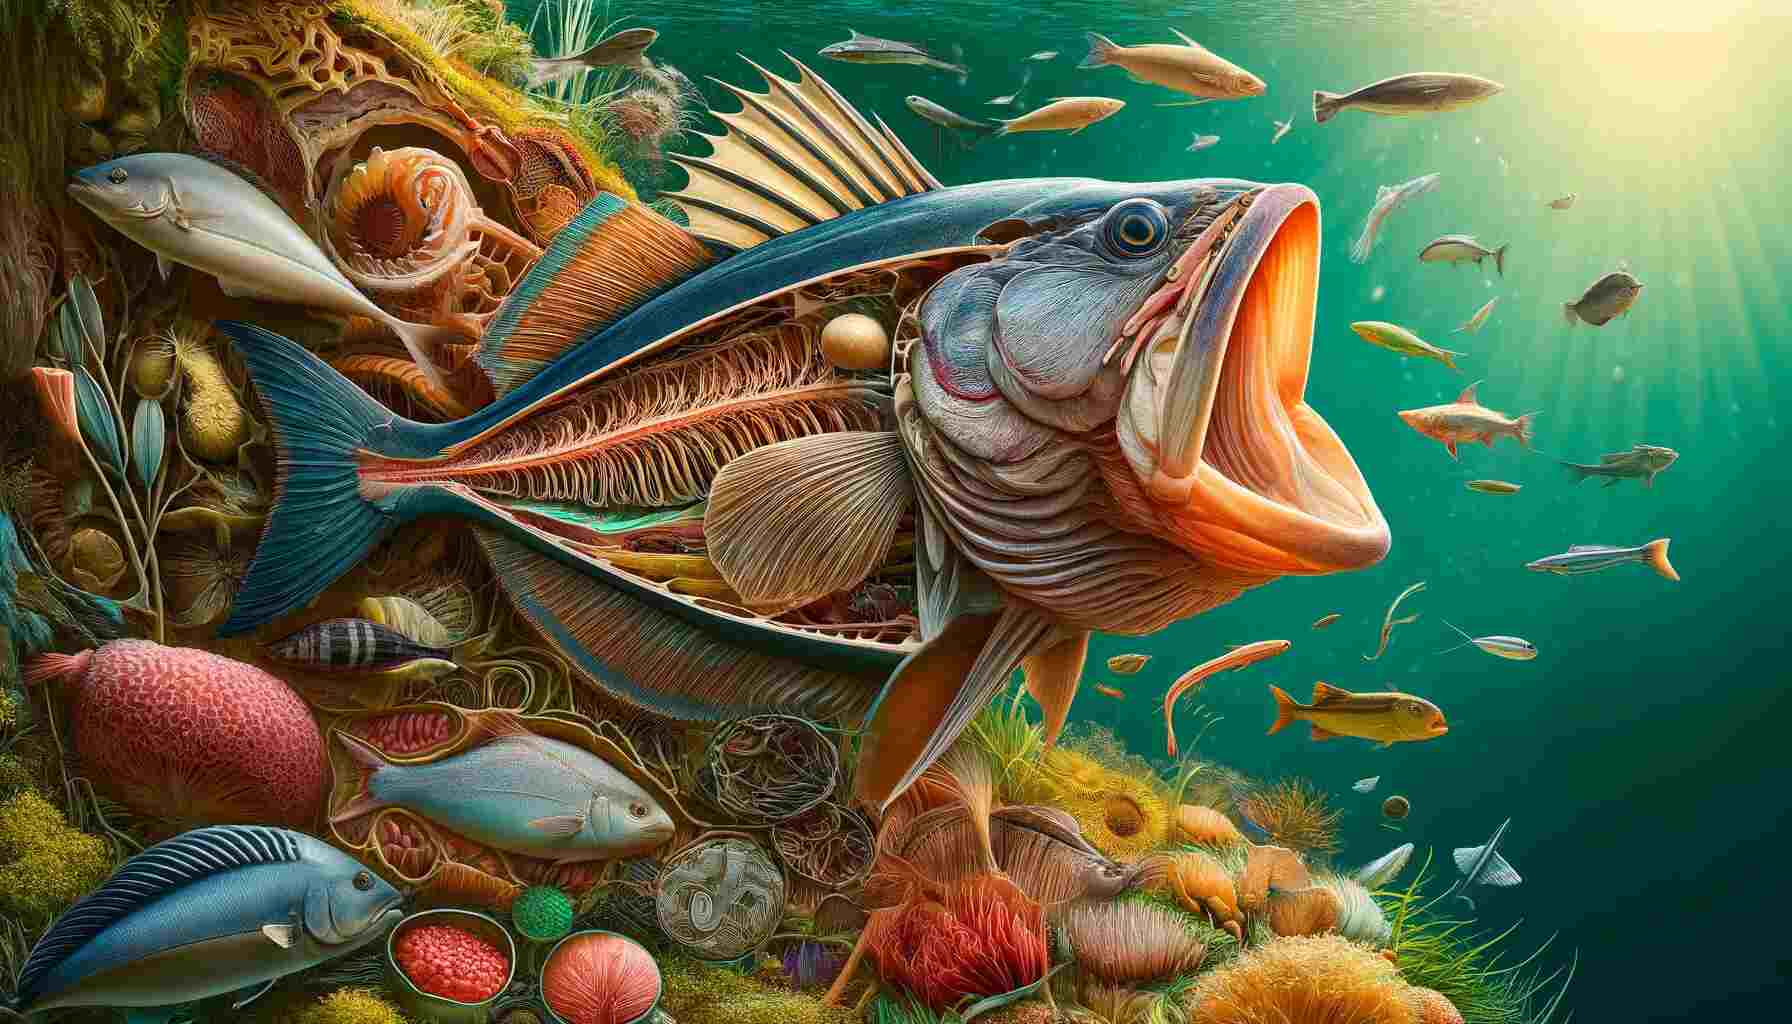 A detailed, vibrant underwater scene showing various fish species, including tuna, flounder, and catfish, with a close-up of fish gills in clear water with aquatic plants and marine life.